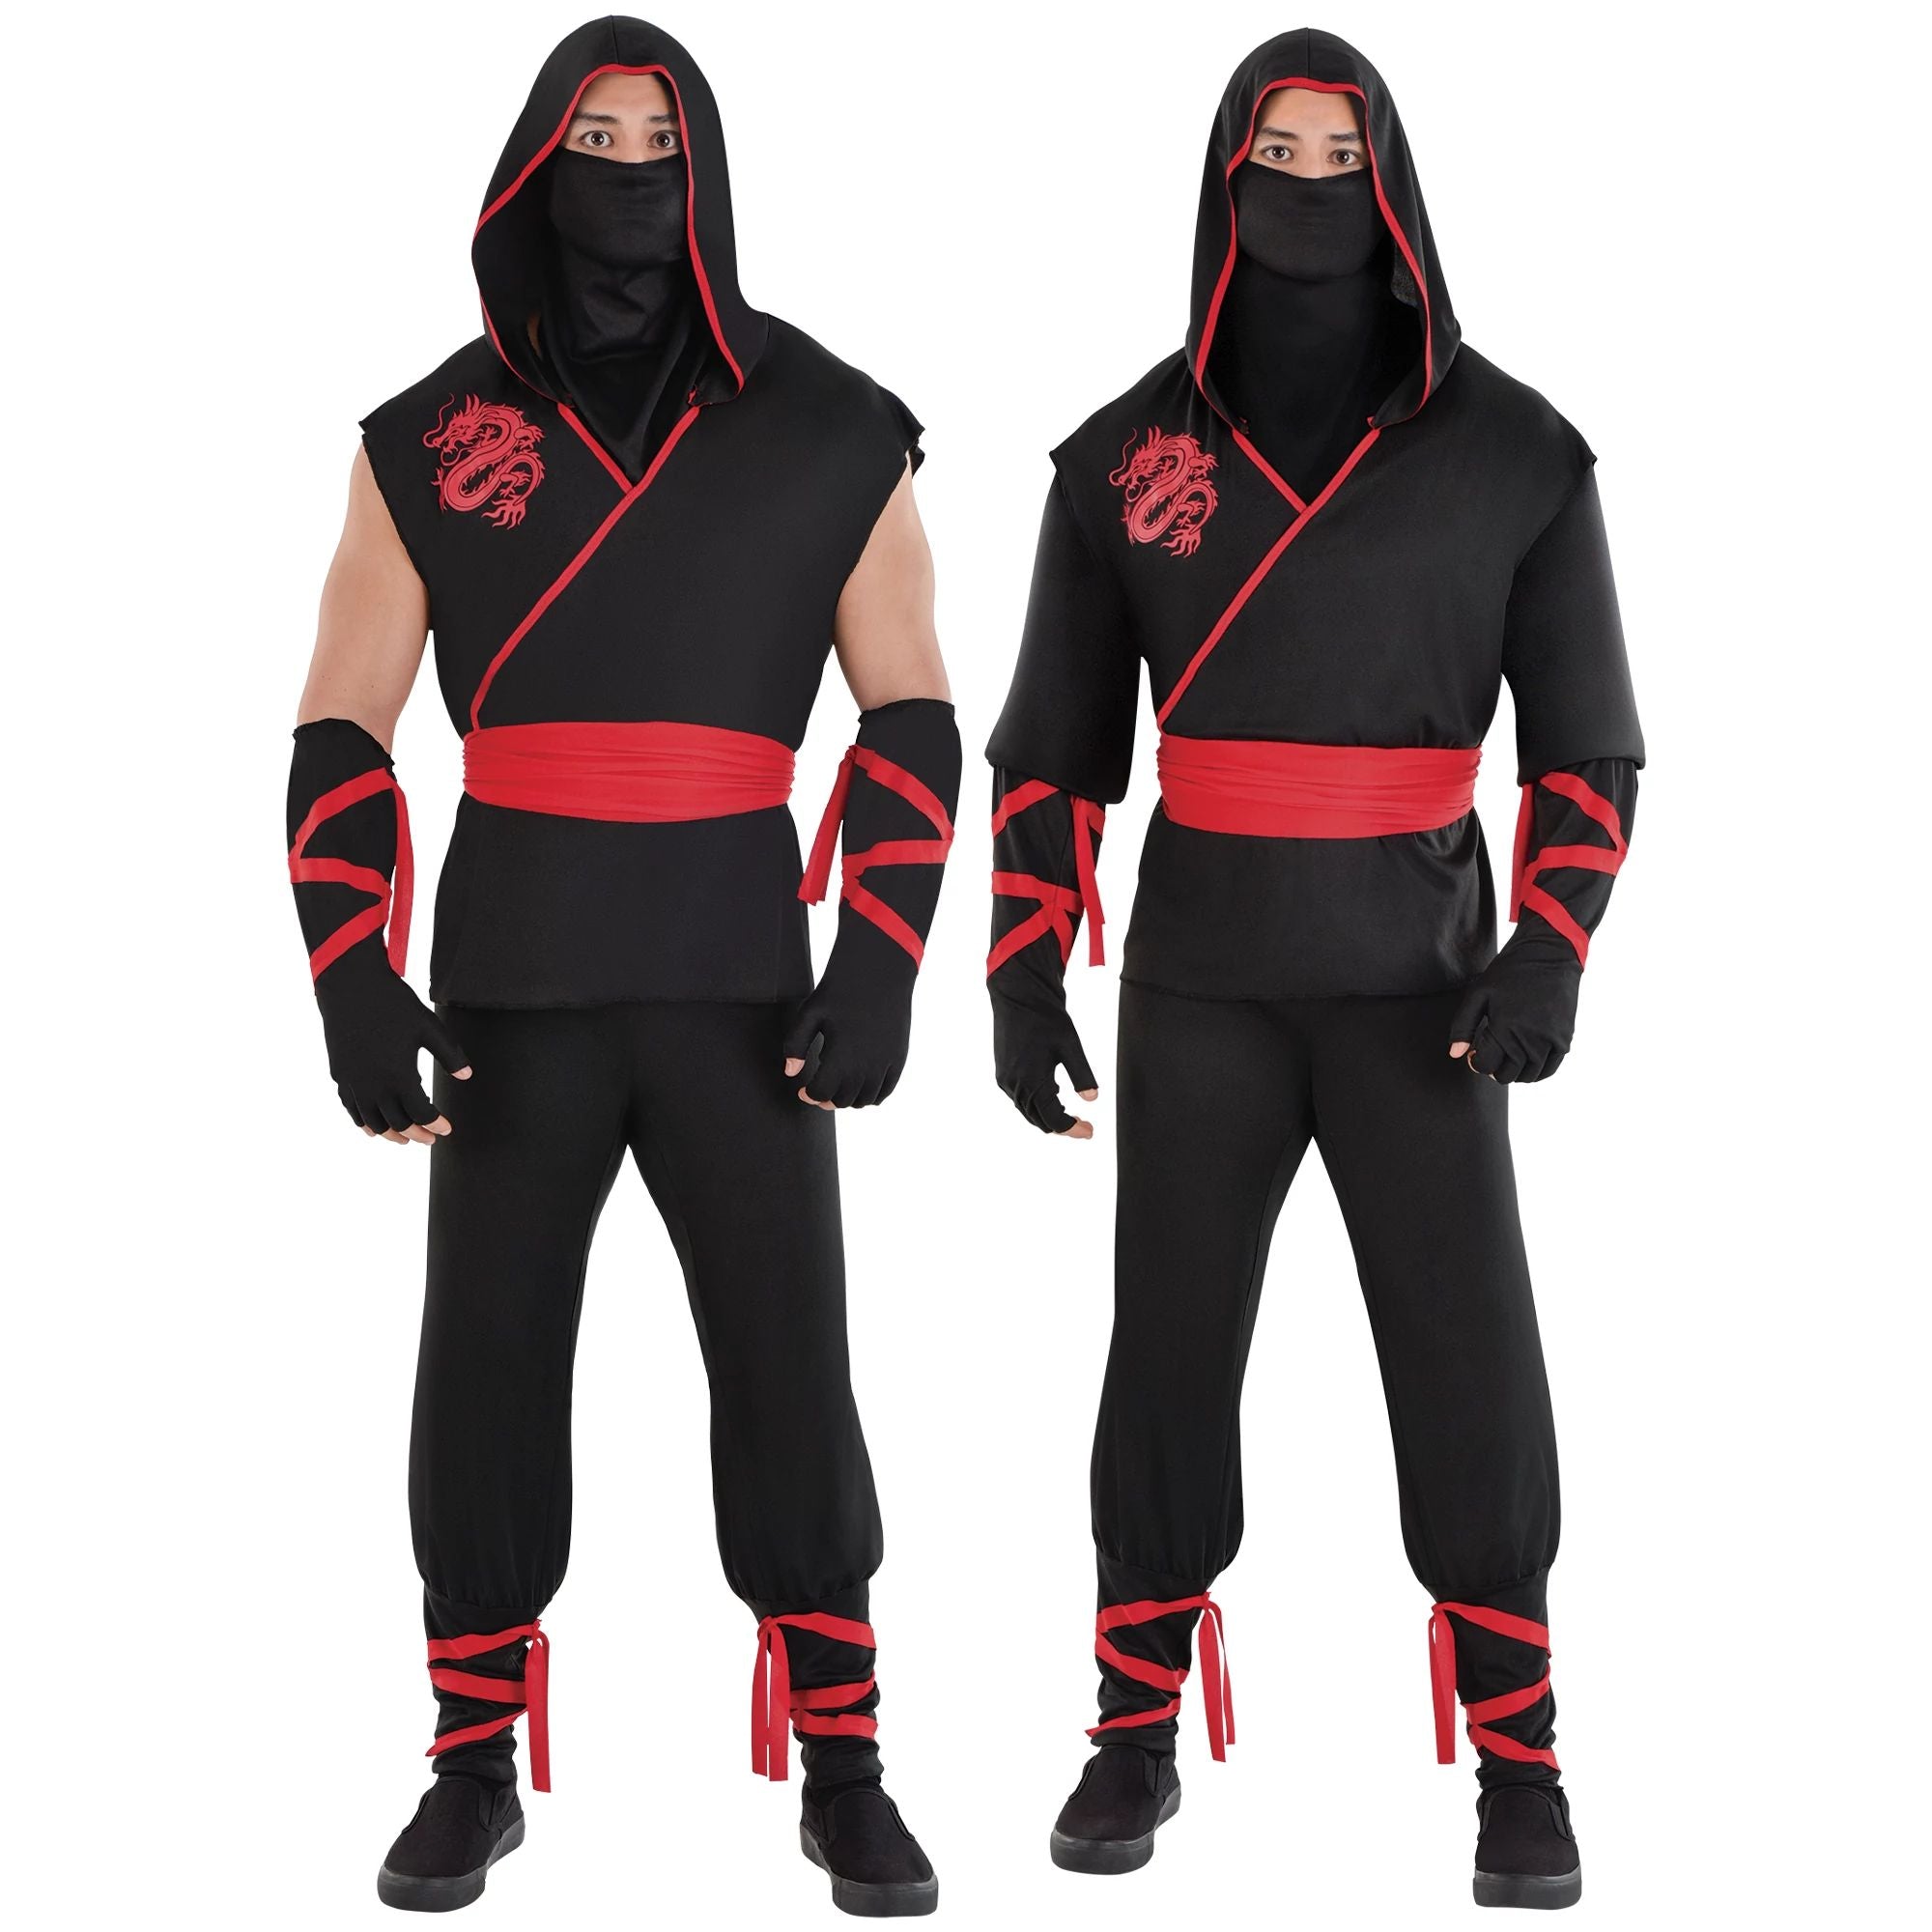 http://www.party-expert.com/cdn/shop/files/halloween-costume-co-costumes-ninja-blood-dragon-assassin-costume-for-adults-black-and-red-shirt-192937396551-33271135109306.jpg?v=1686831442&width=2000